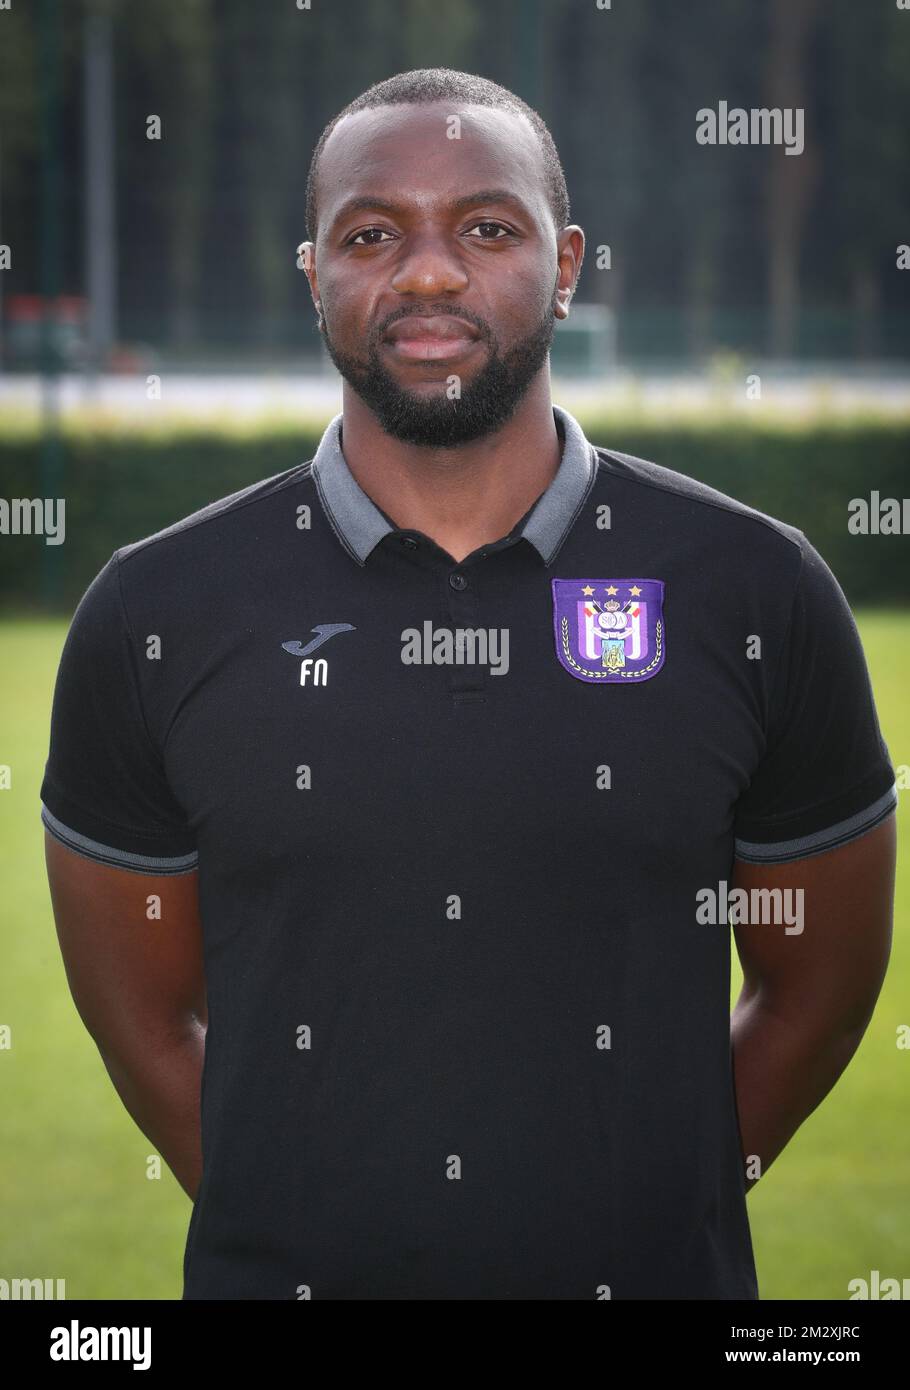 Anderlecht's assistant coach Floribert Ngalula poses for the photographer, at the 2019-2020 photoshoot of Belgian Jupiler Pro League club Royal Sporting Club Anderlecht, Thursday 18 July 2019 in Anderlecht. BELGA PHOTO VIRGINIE LEFOUR Stock Photo